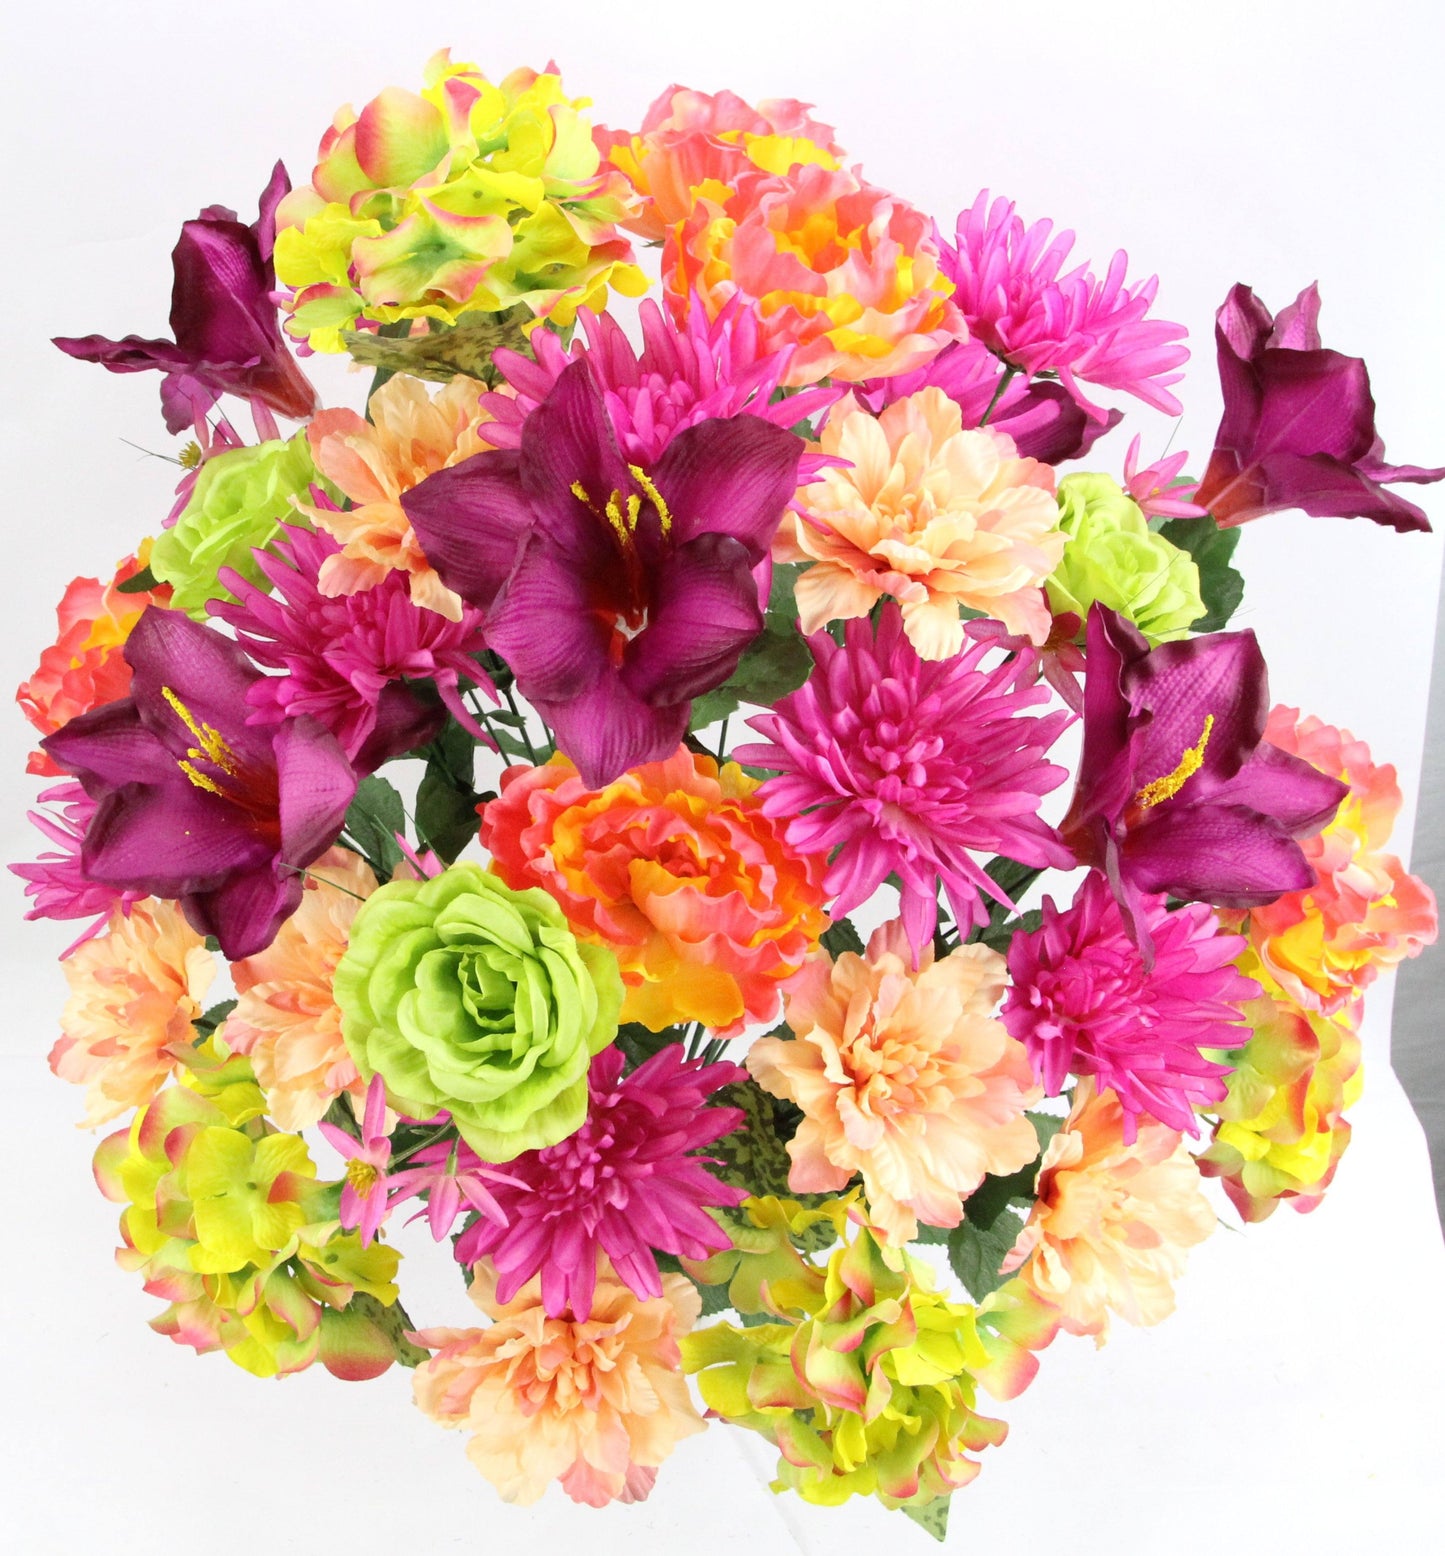 Peony, Rose, Lily, Delilah, and Hydrangeas  Magenta Spring Mix